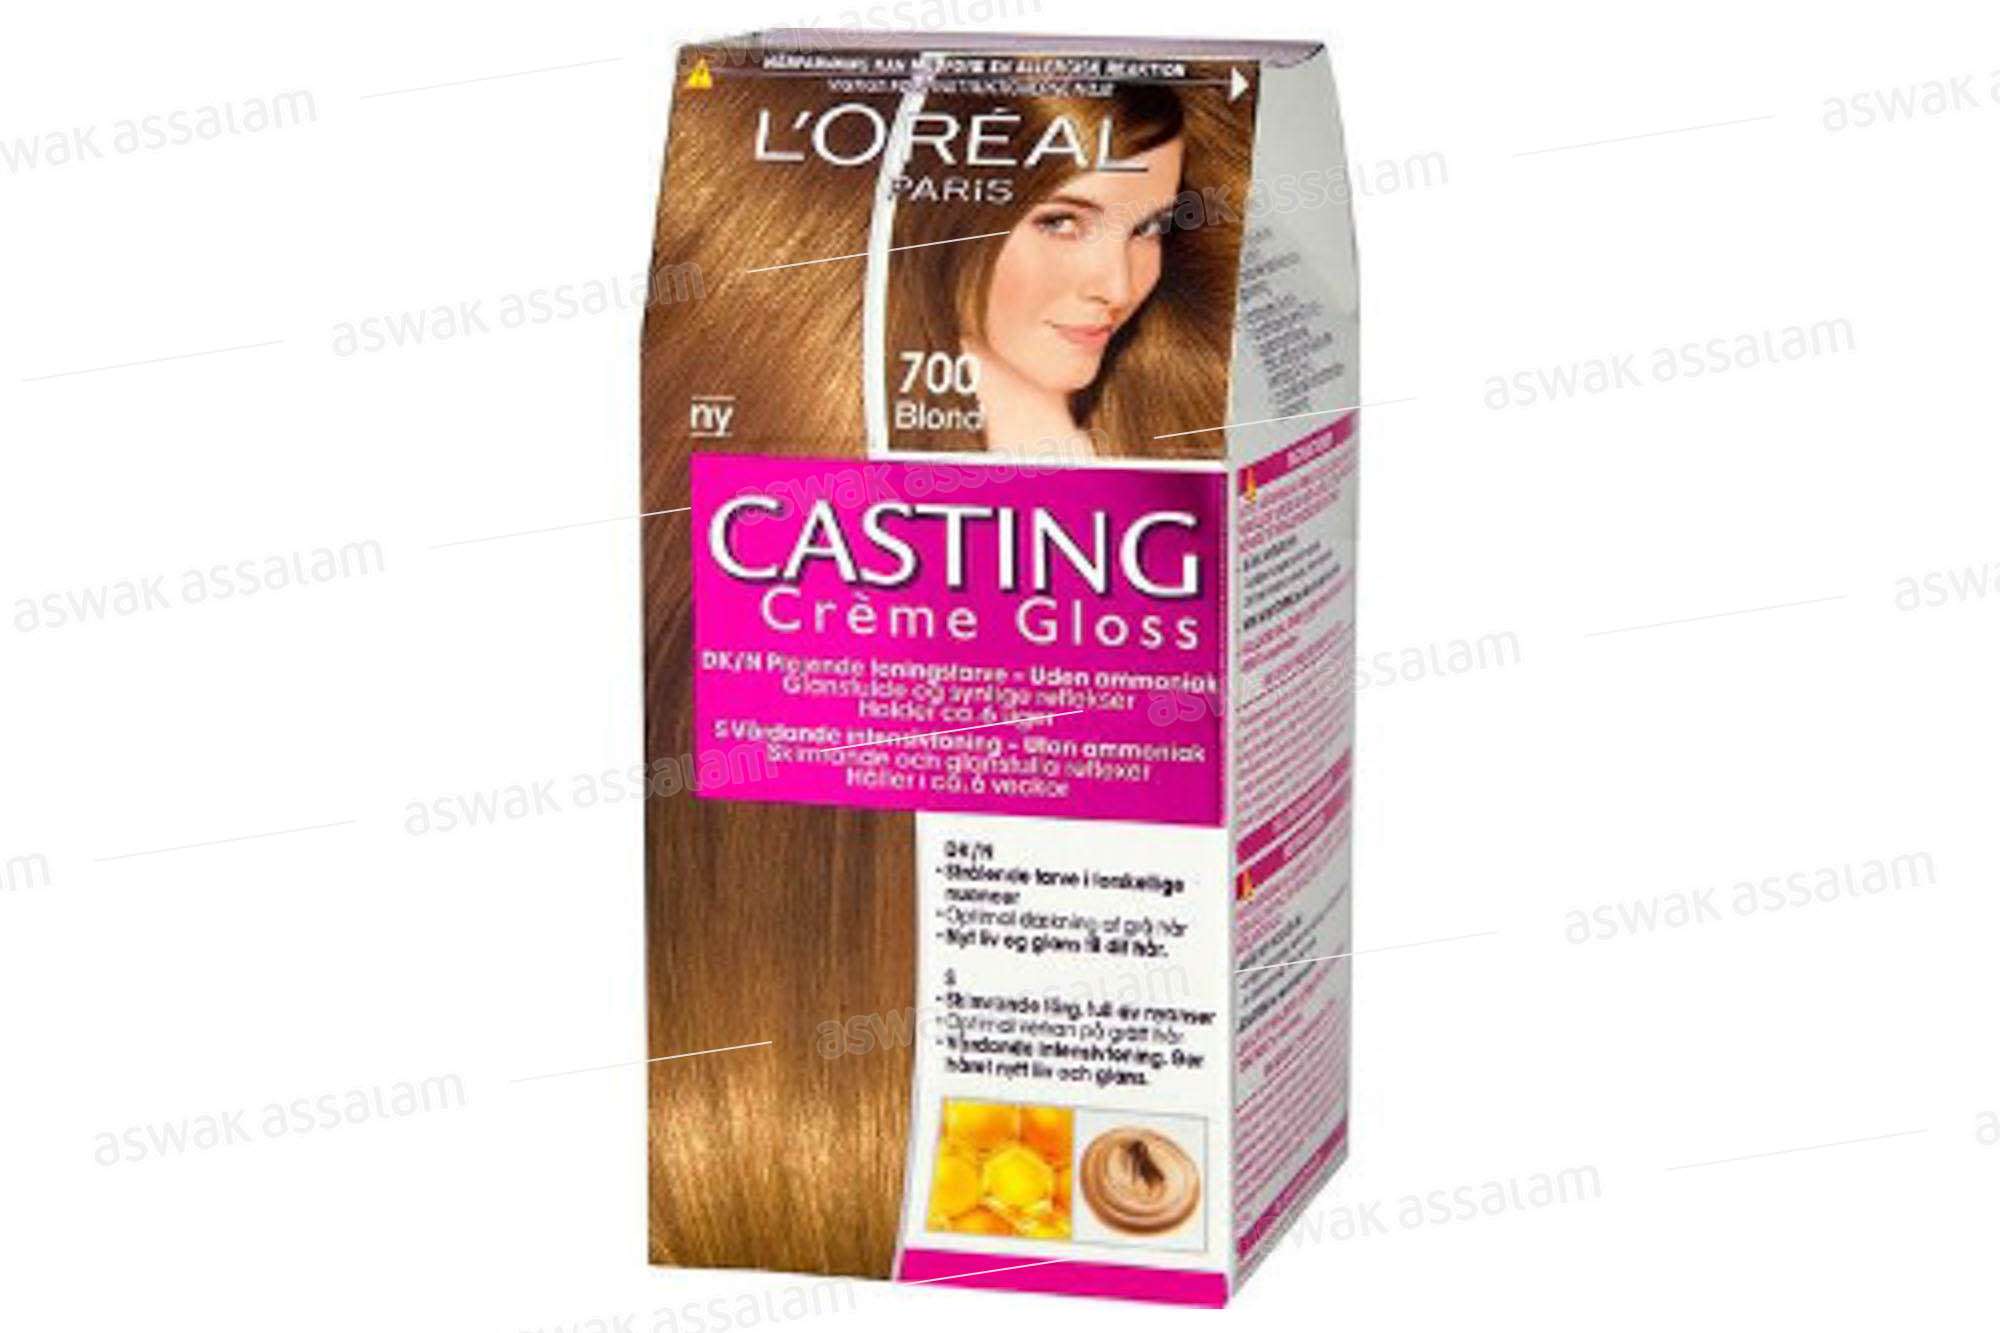 COLORATION CREME GLOSS BLOND 700 CASTING L'OREAL